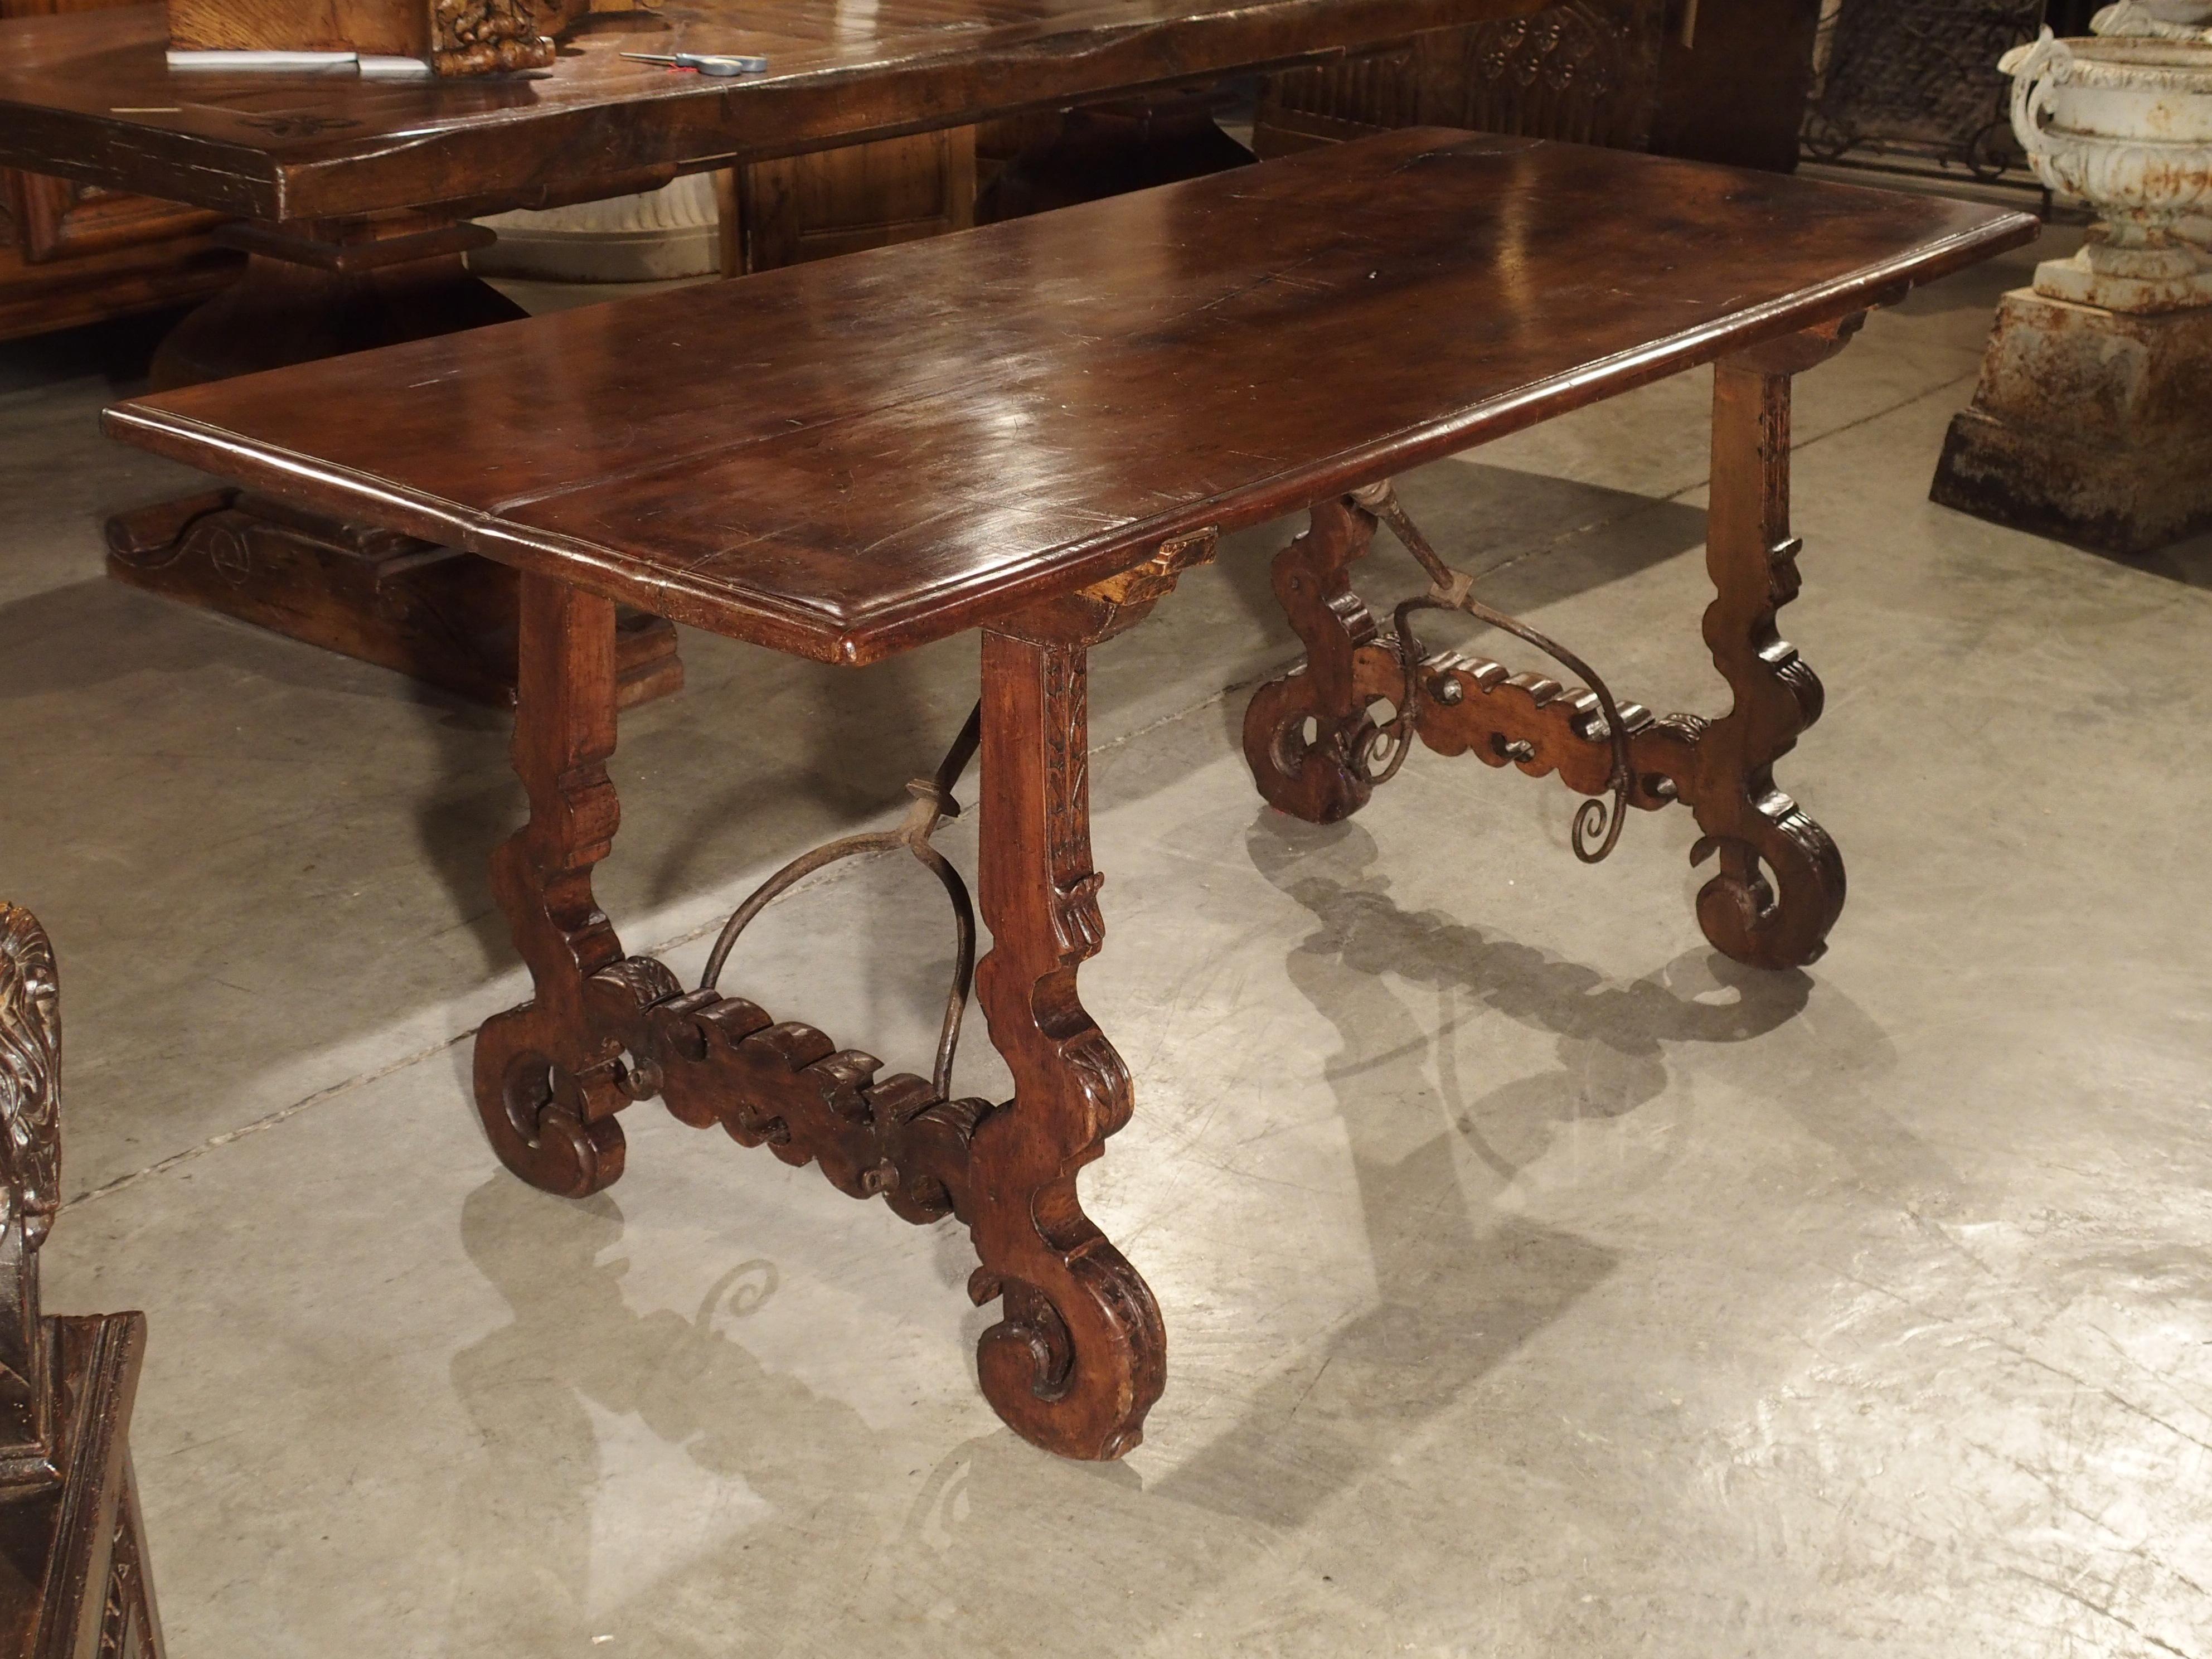 From Spain, this antique walnut wood and iron table has a beautiful single plank top which has remained nice and flat, which is rare. There is ample room at either end of the table to sit comfortably as well as on the sides of the table. The highly